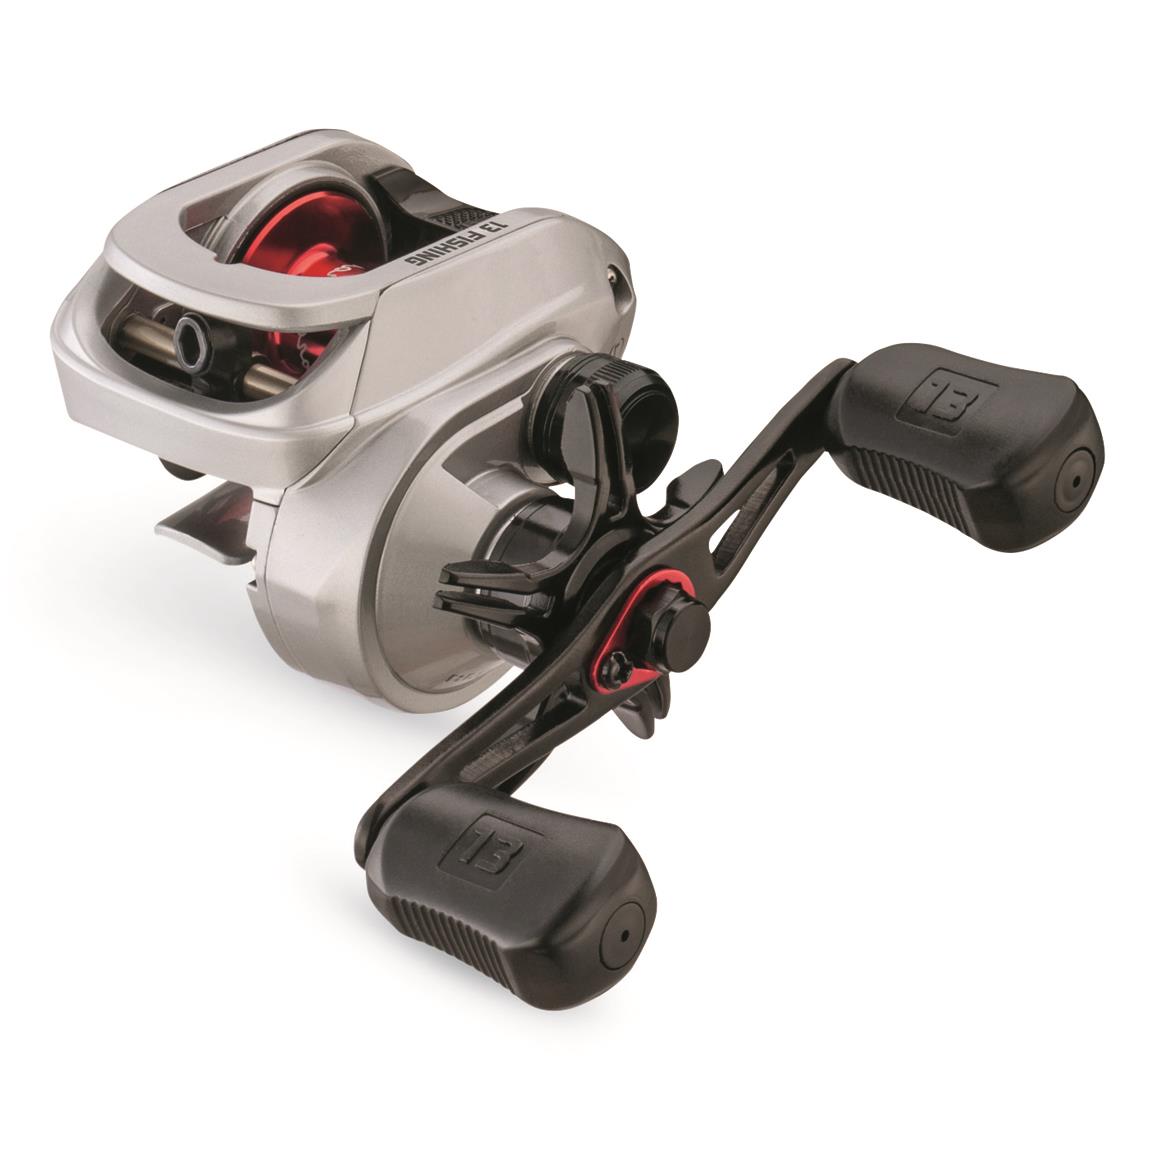 Ugly Stick® Carbon Series Baitcasting Rod and Reel Combo - 715403, Casting  Combos at Sportsman's Guide